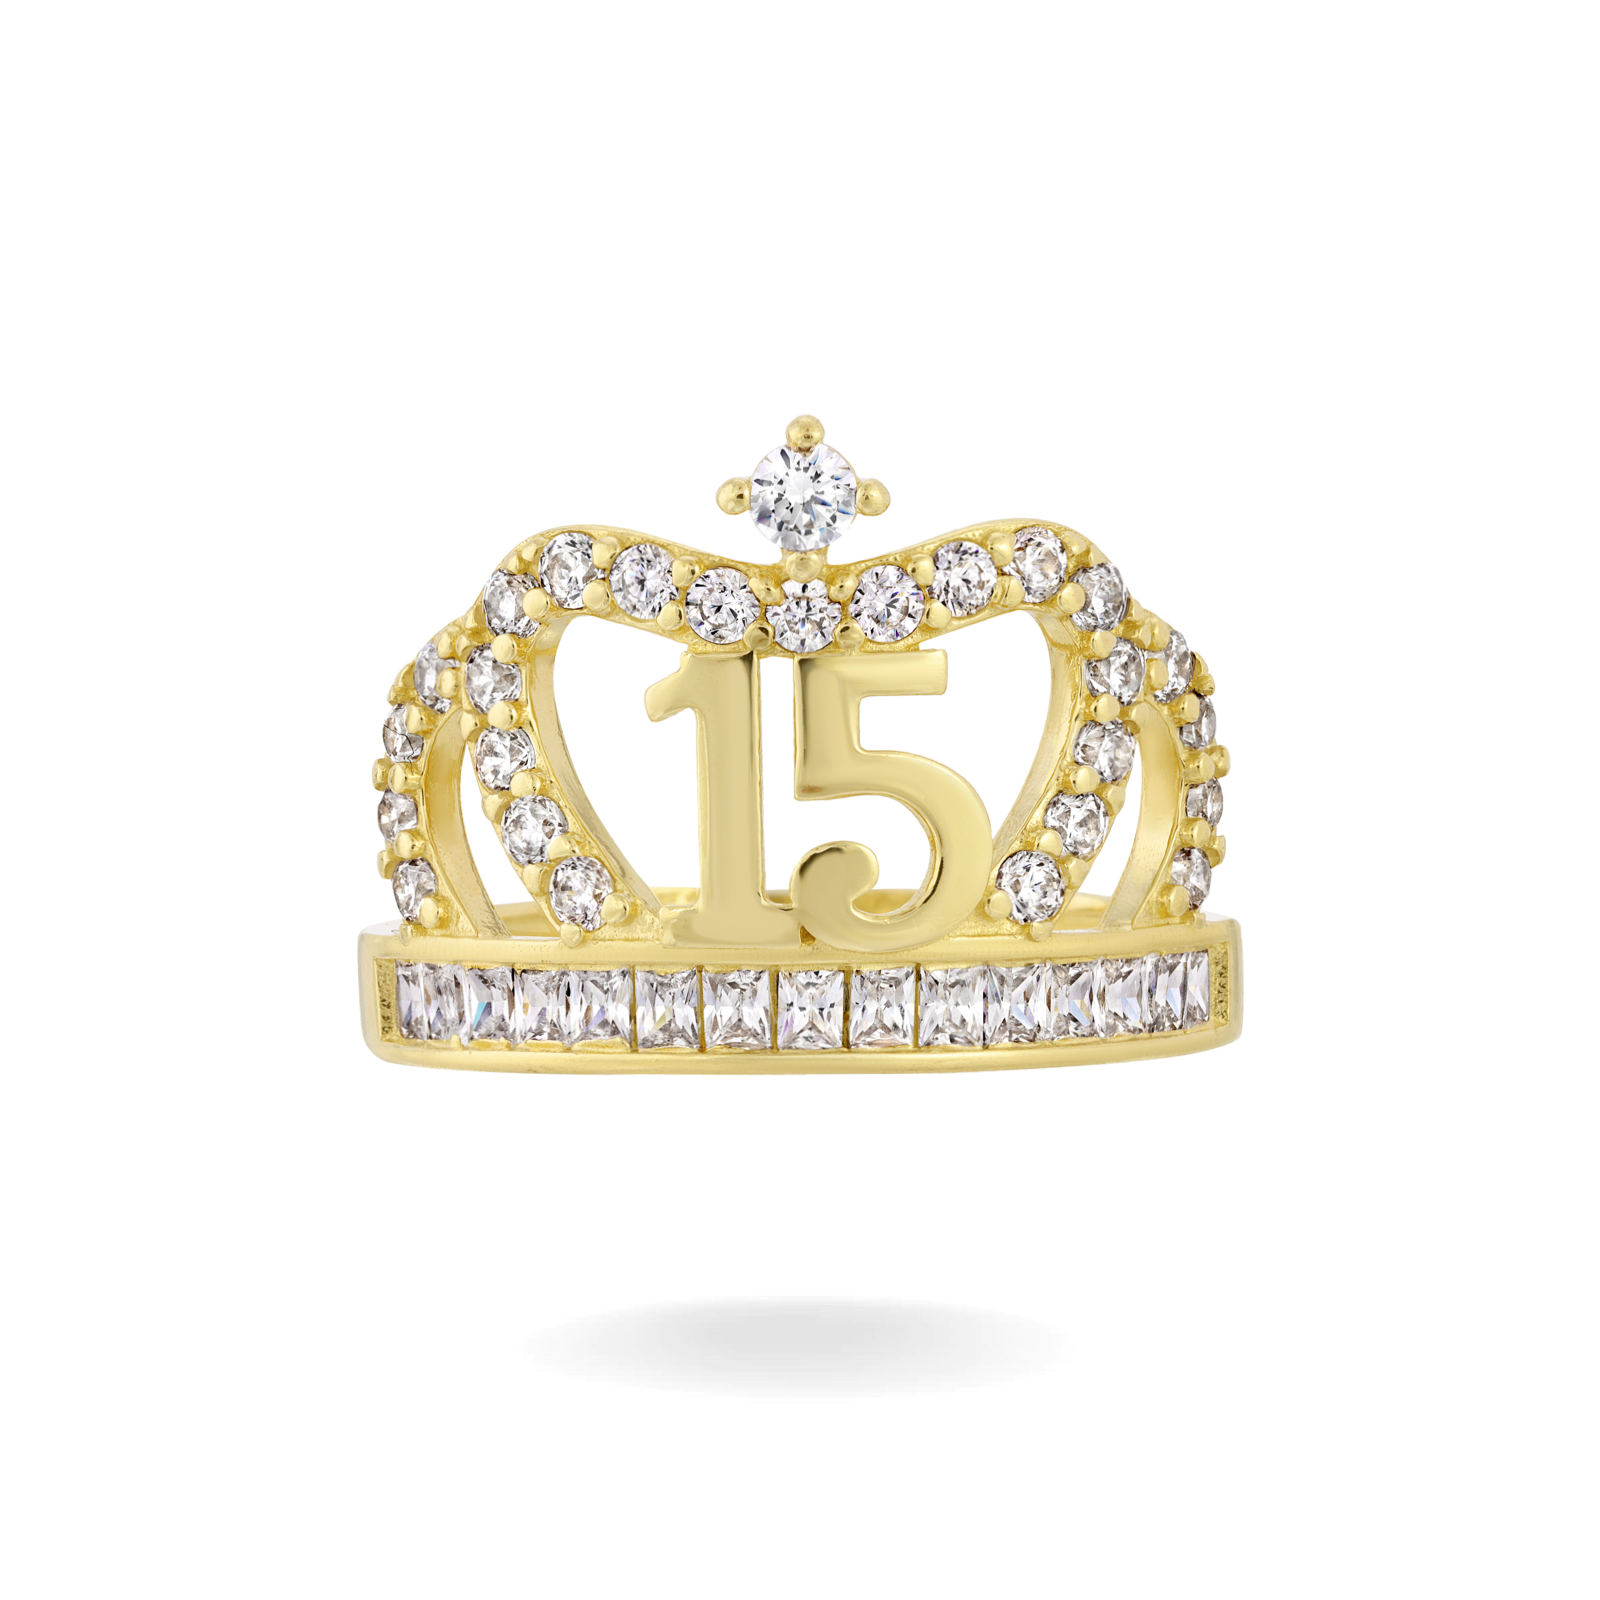 14K YELLOW GOLD PAVE QUINCEANERA REIGN CROWN RING